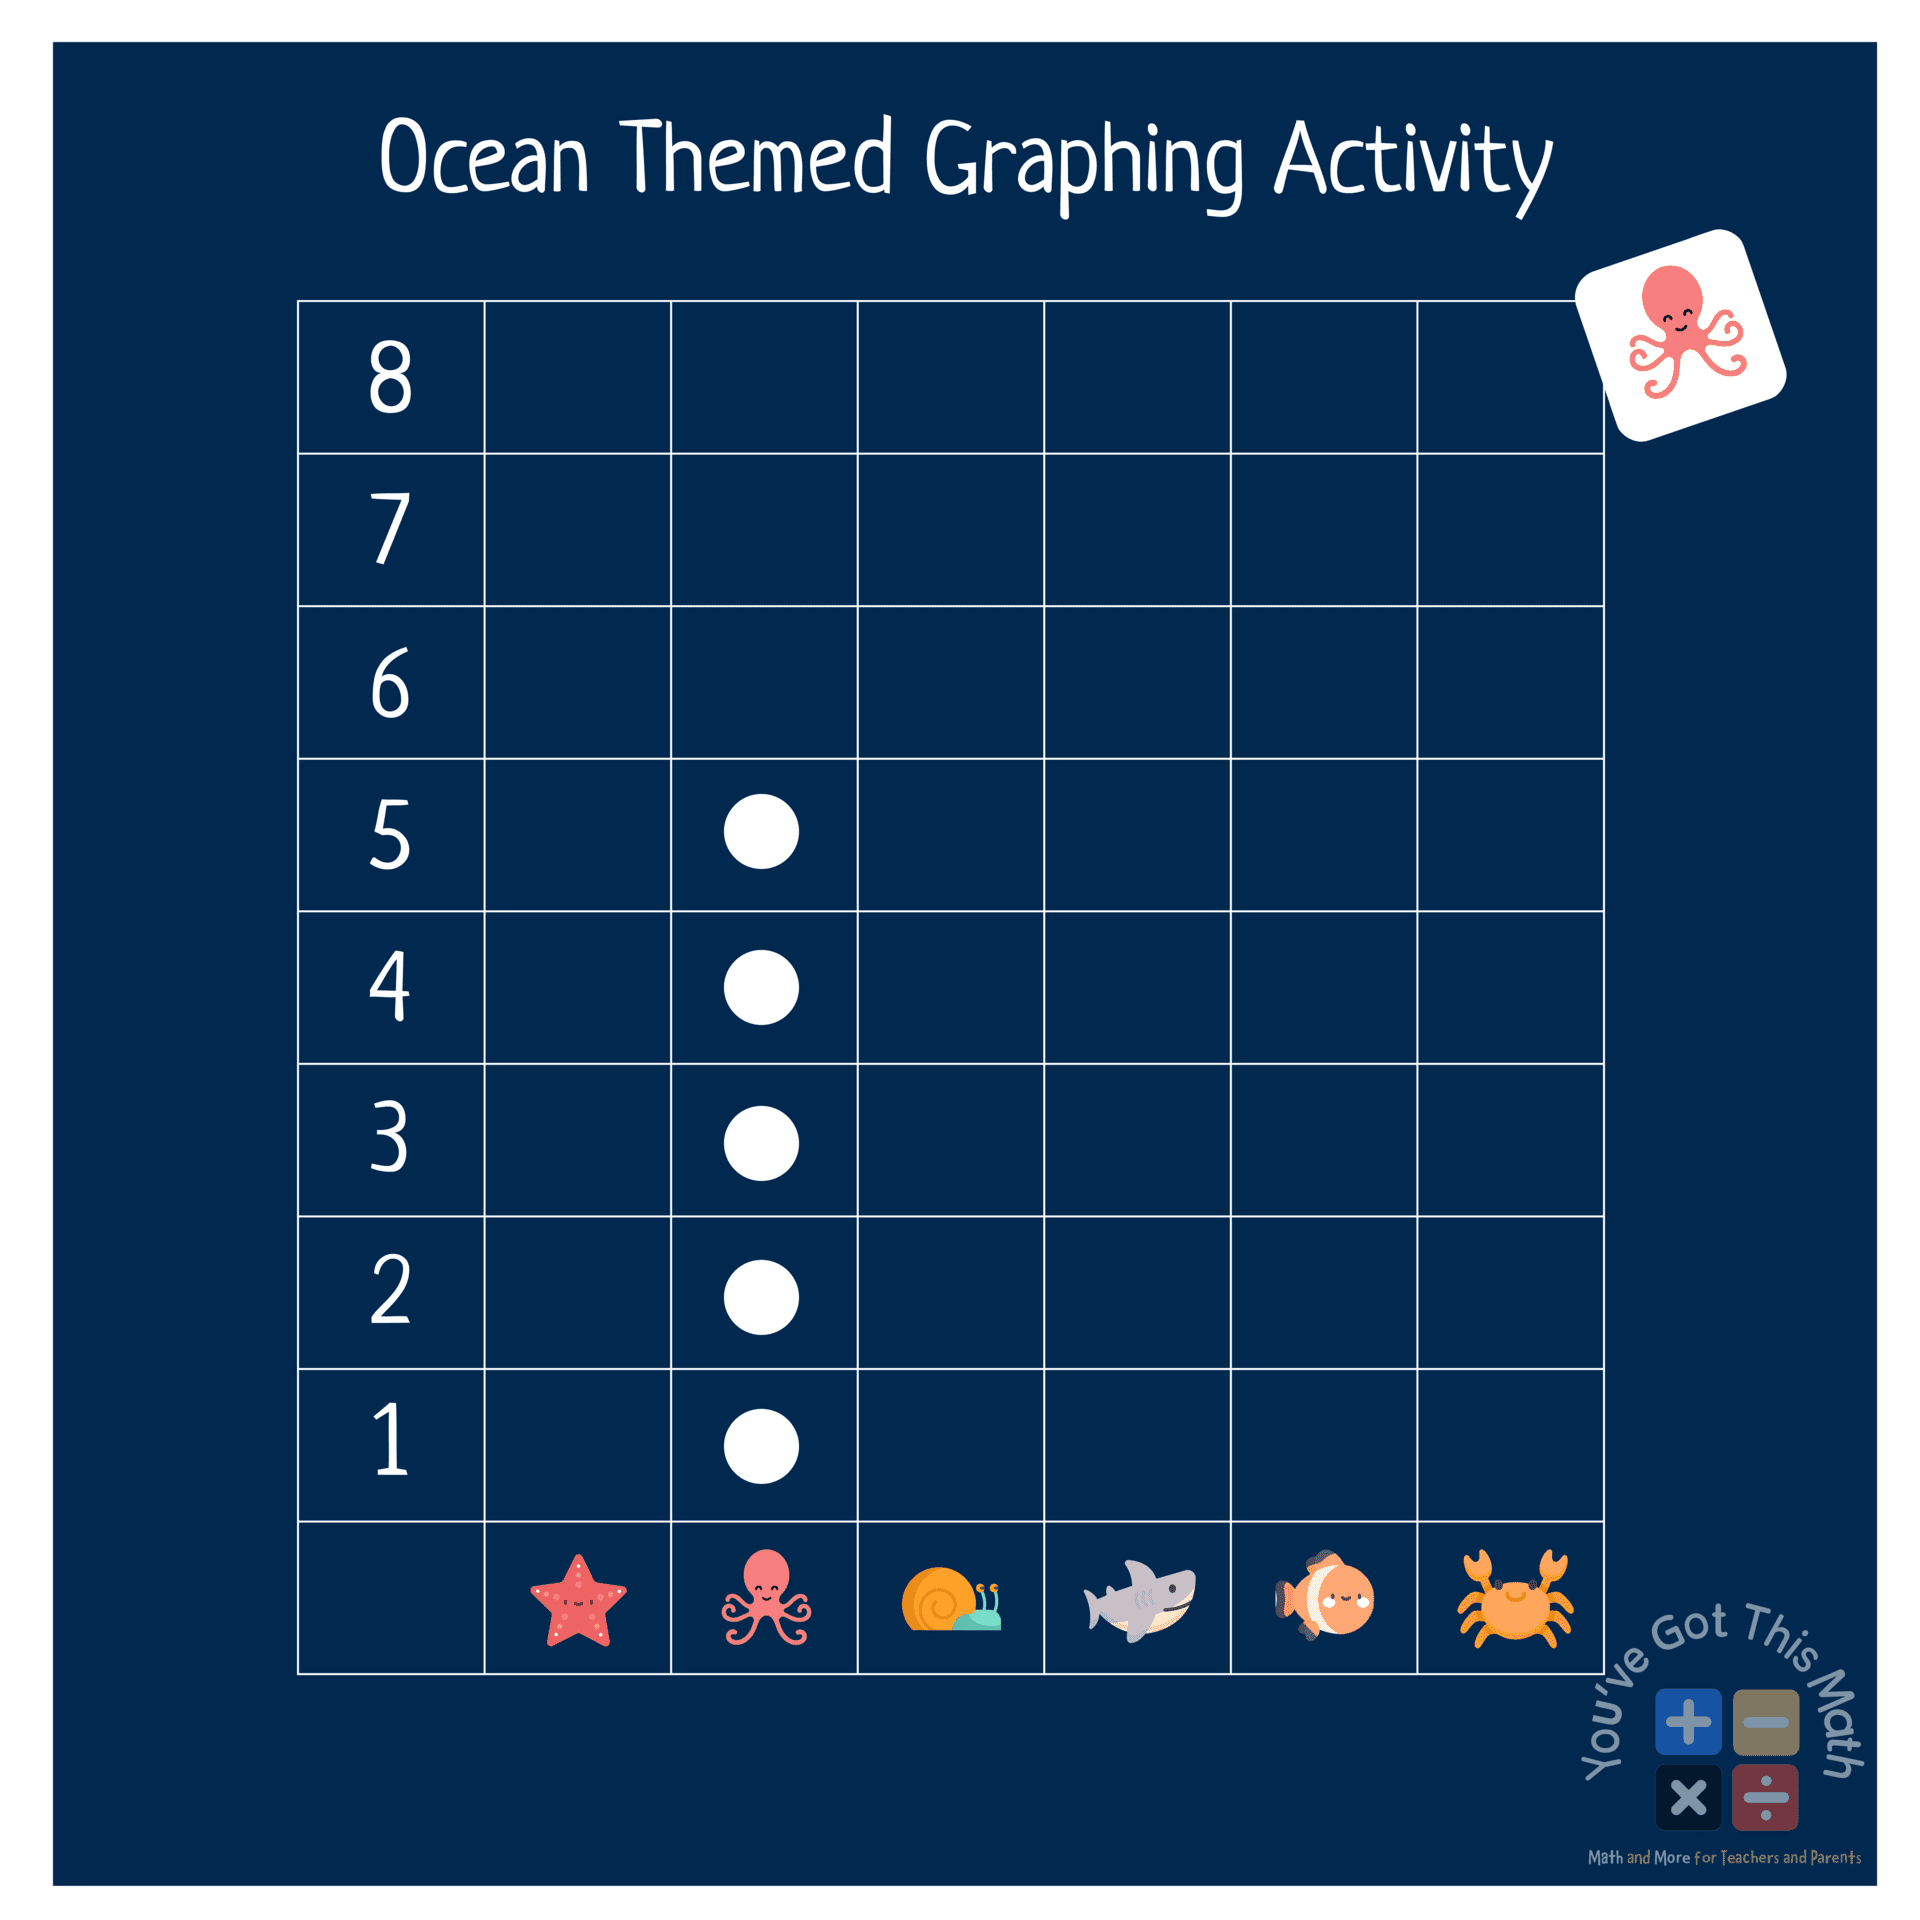 Ocean Themed Graphing Activity